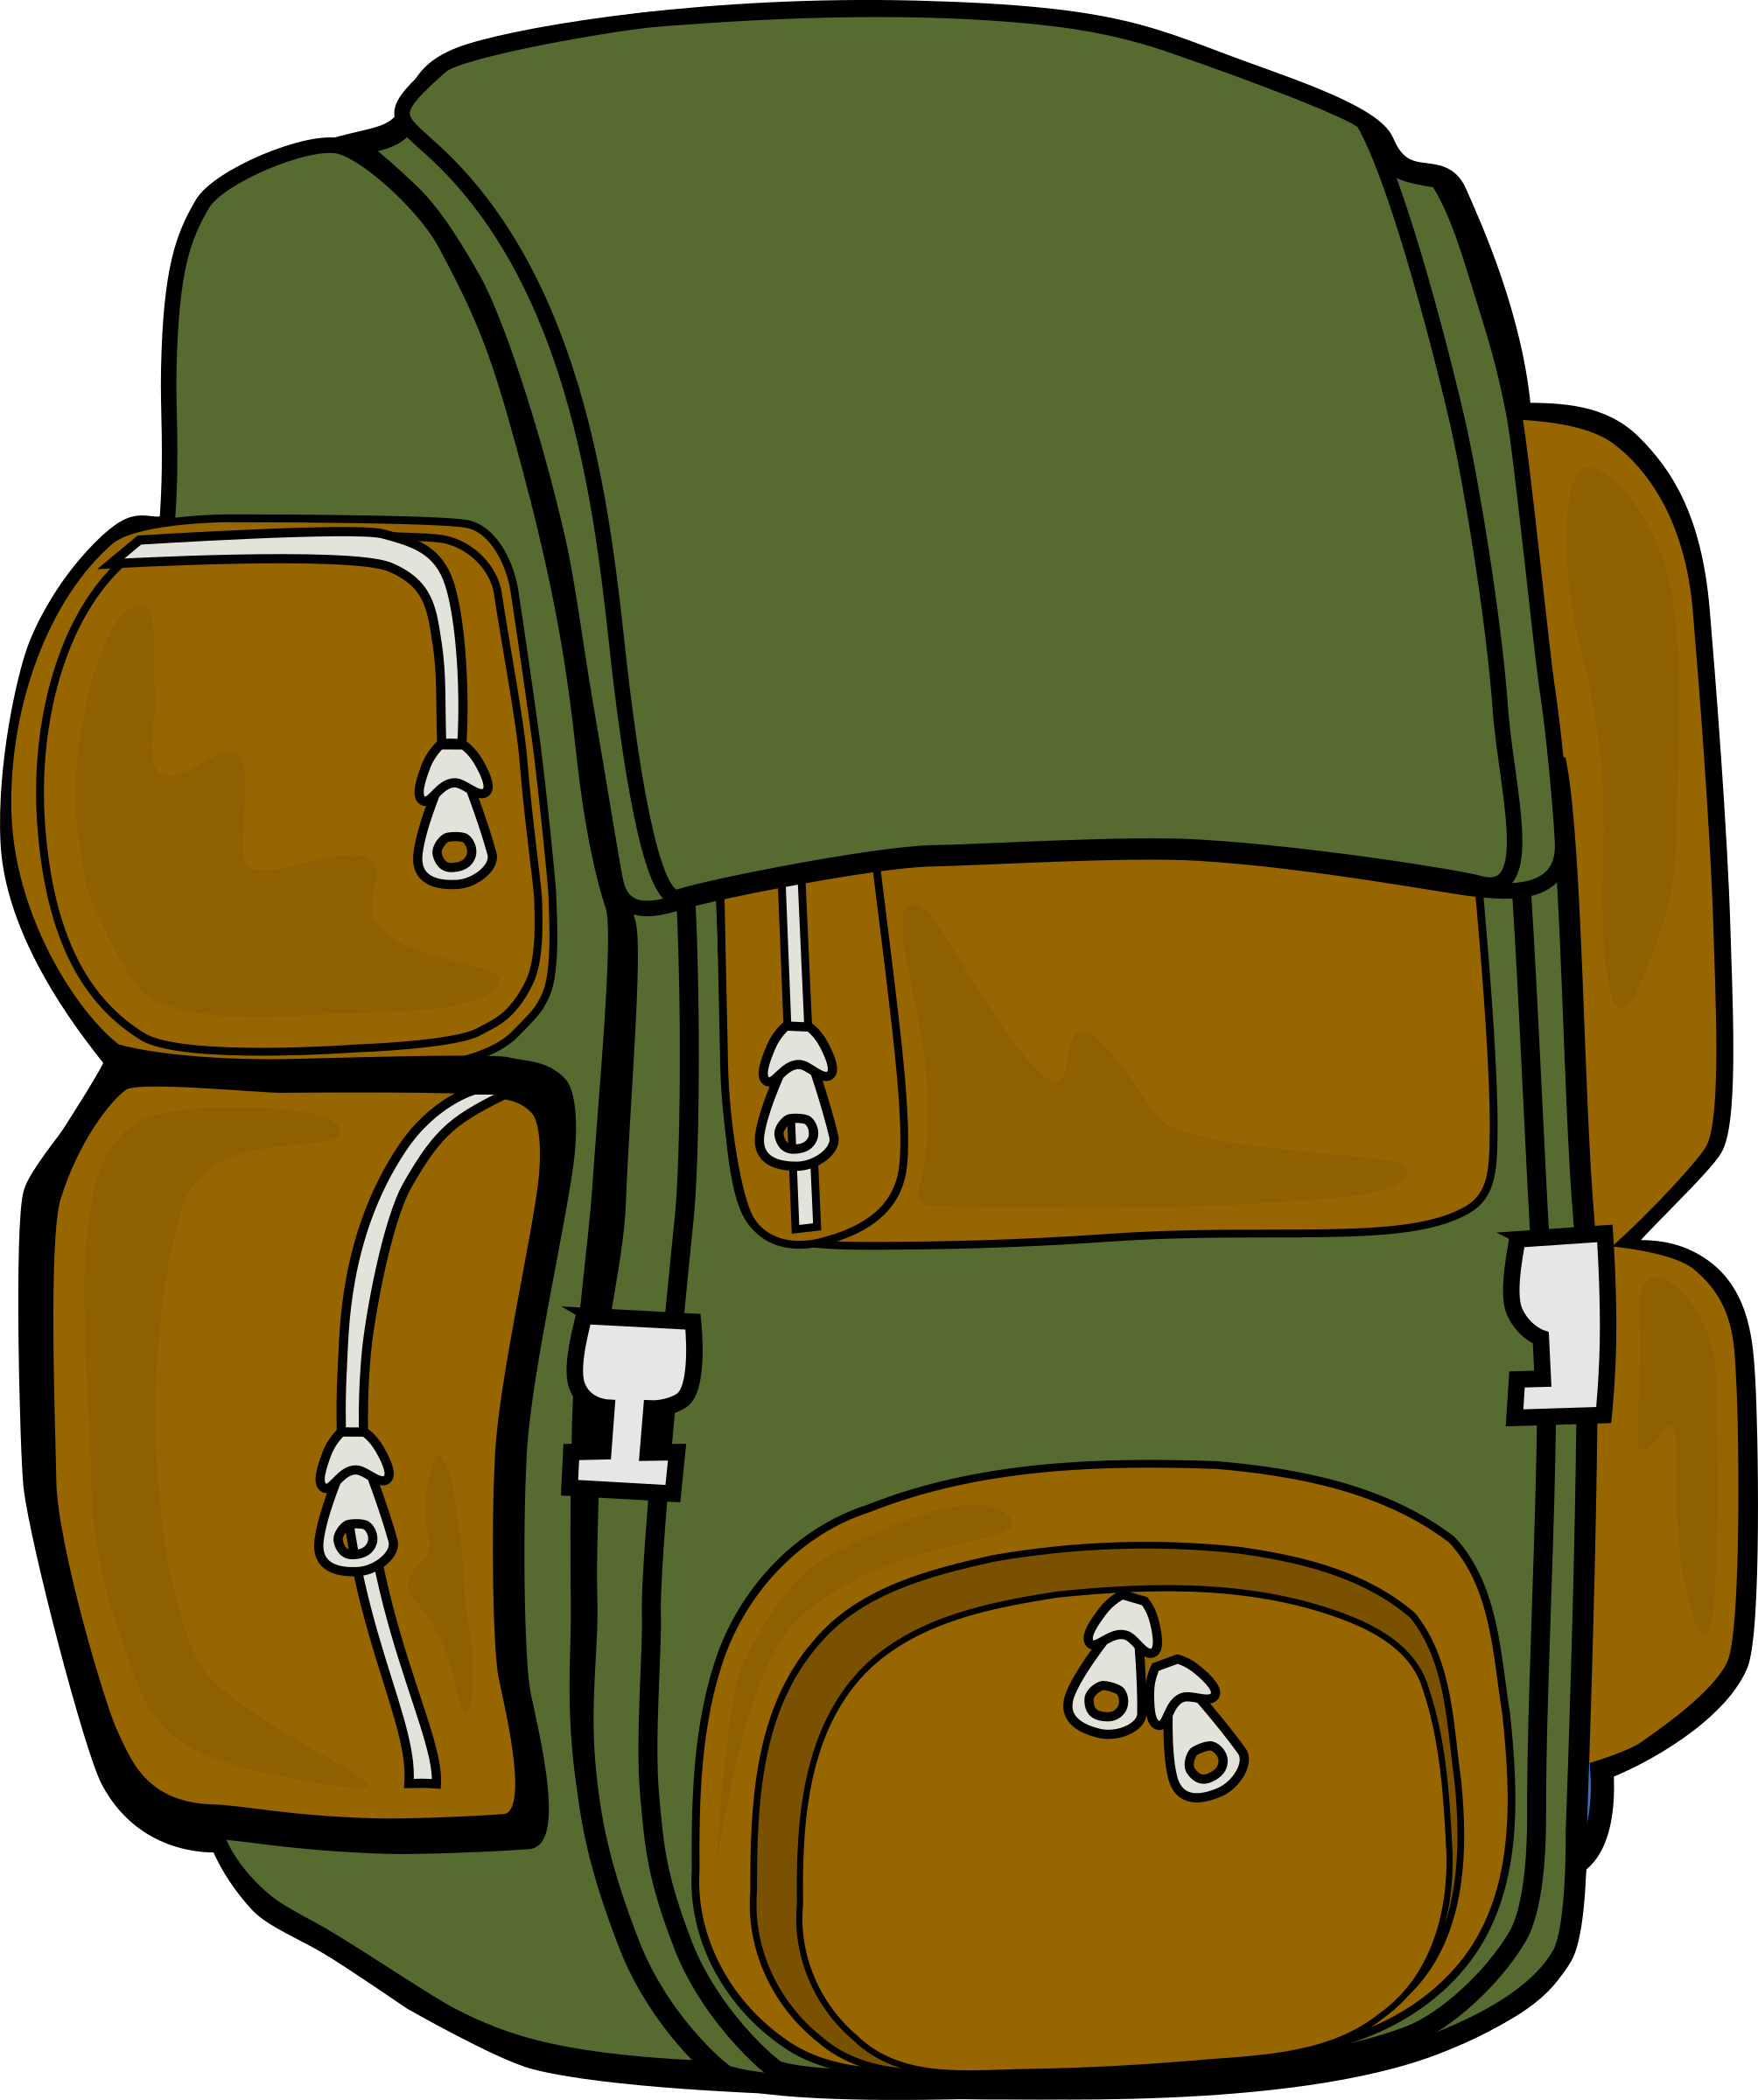 Backpack clipart animation, Backpack animation Transparent.